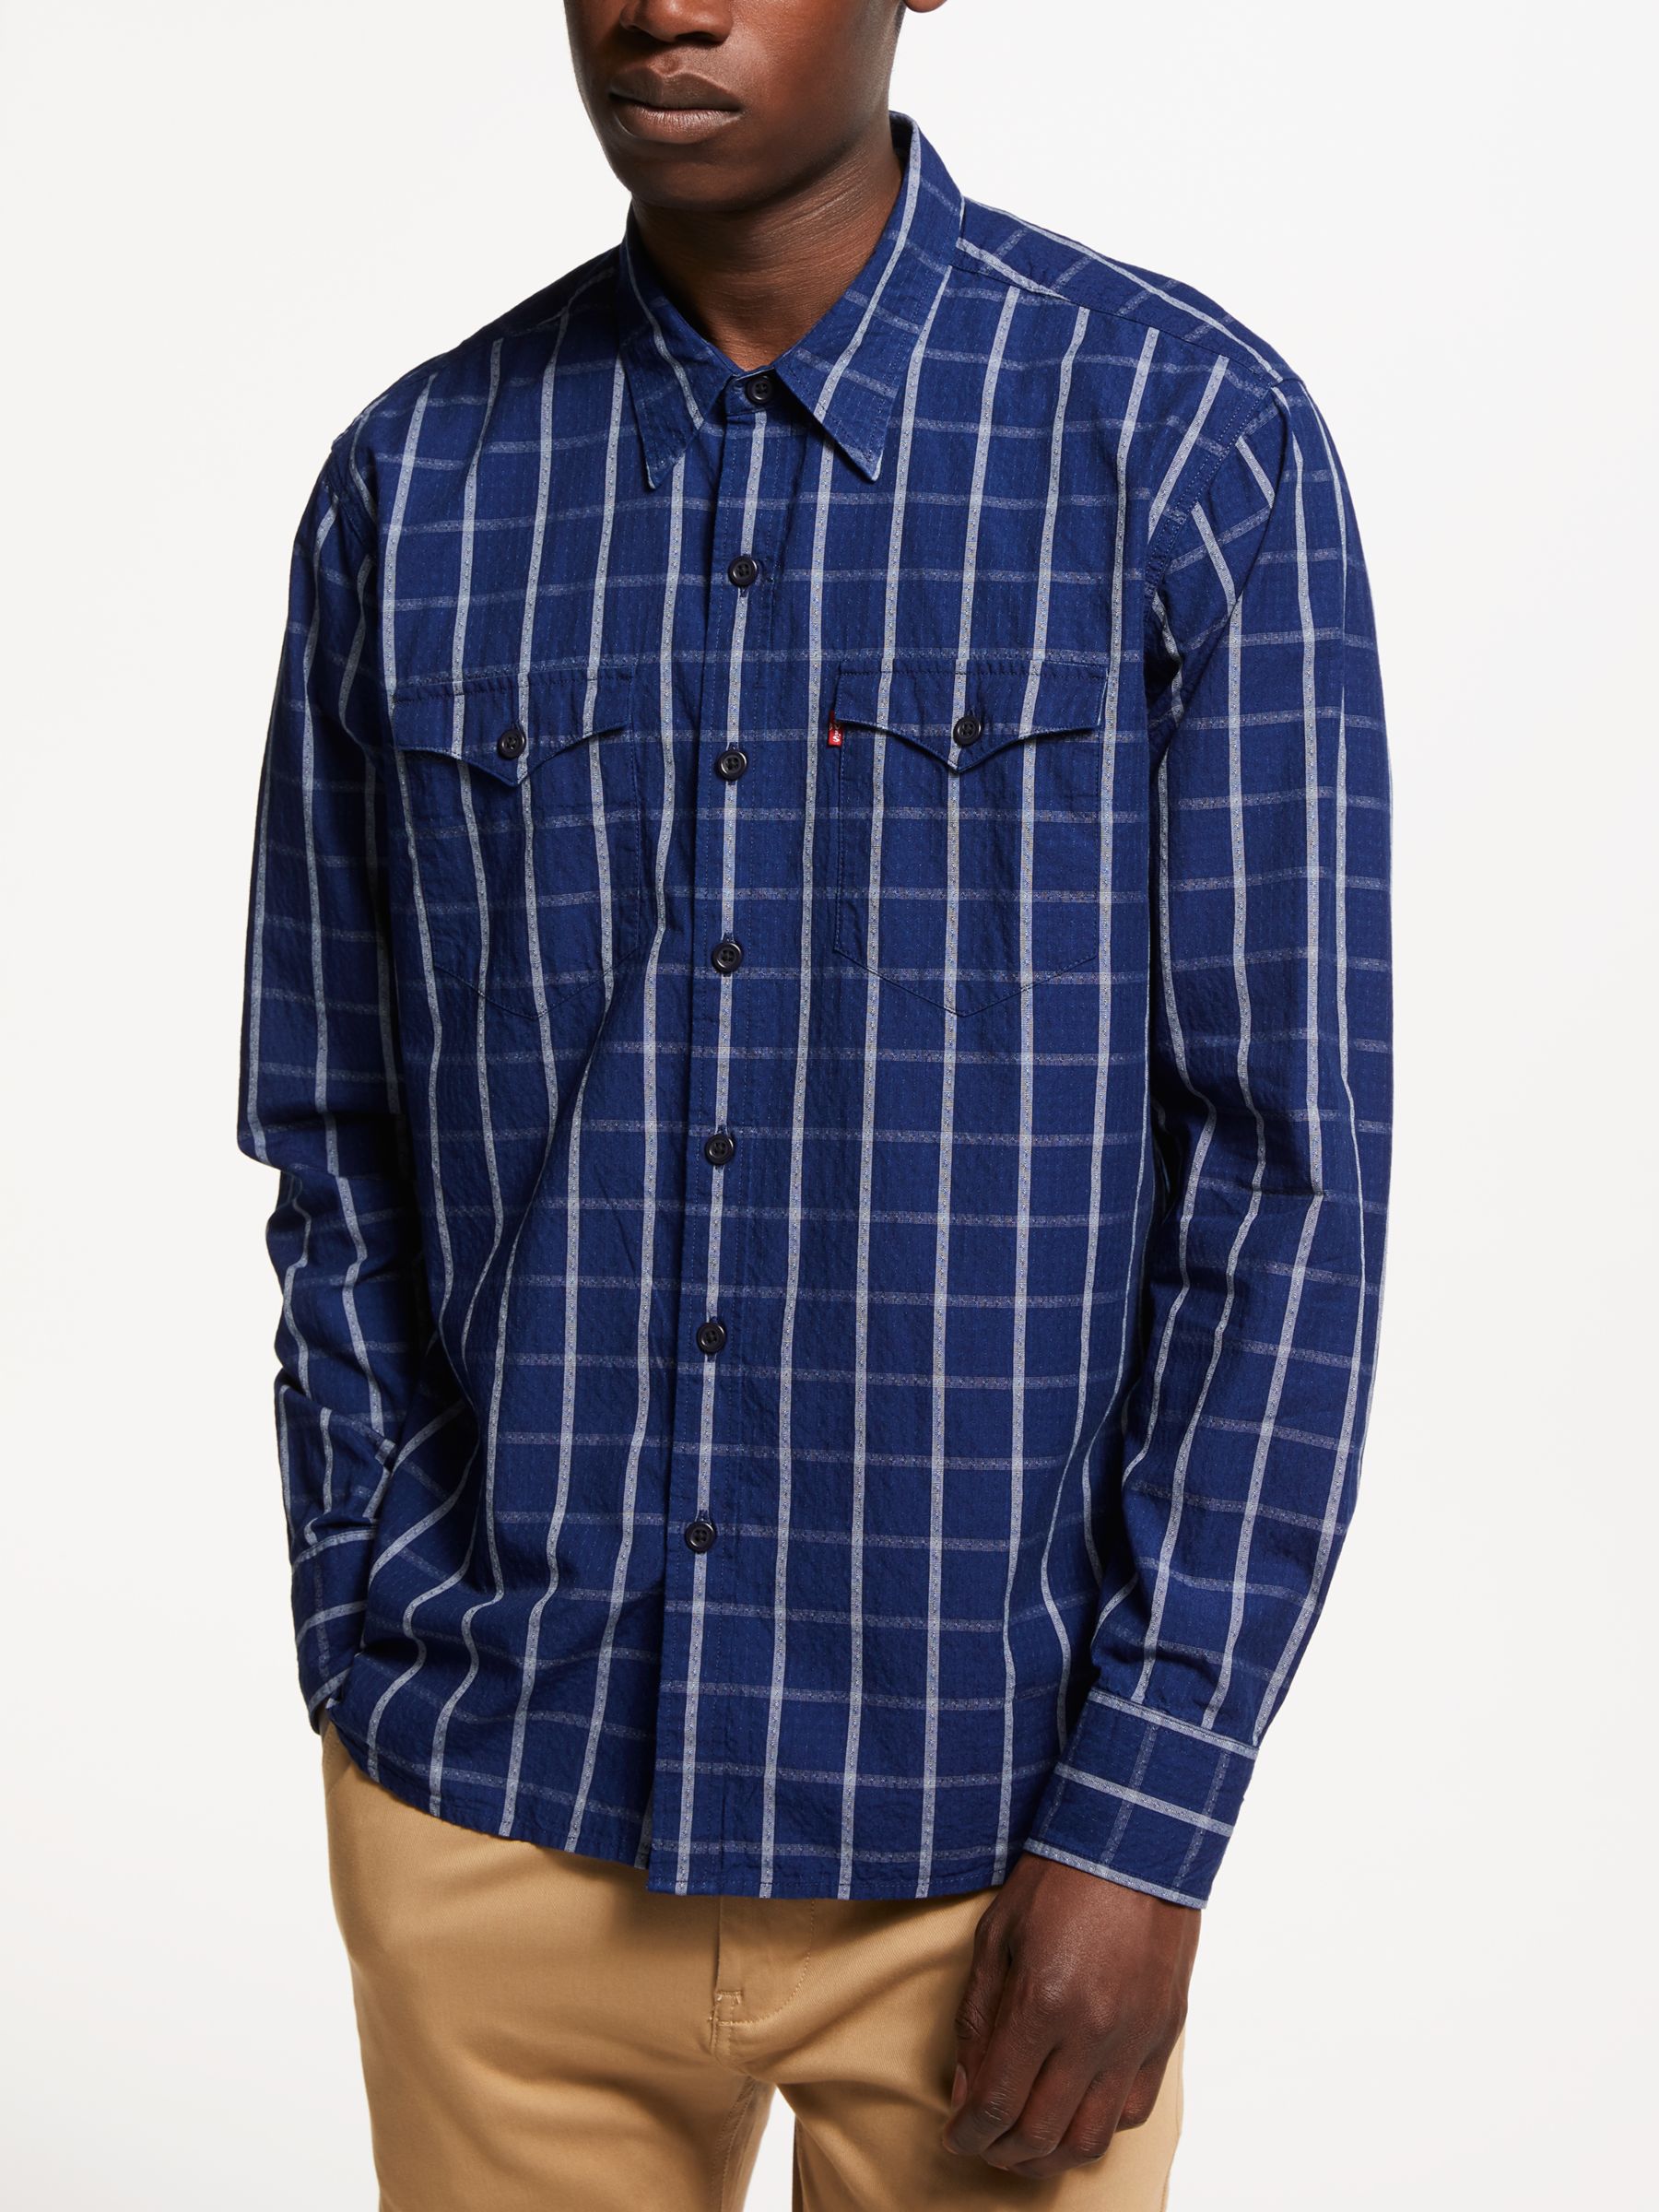 Levi's Barstow Western Check Shirt, Blue